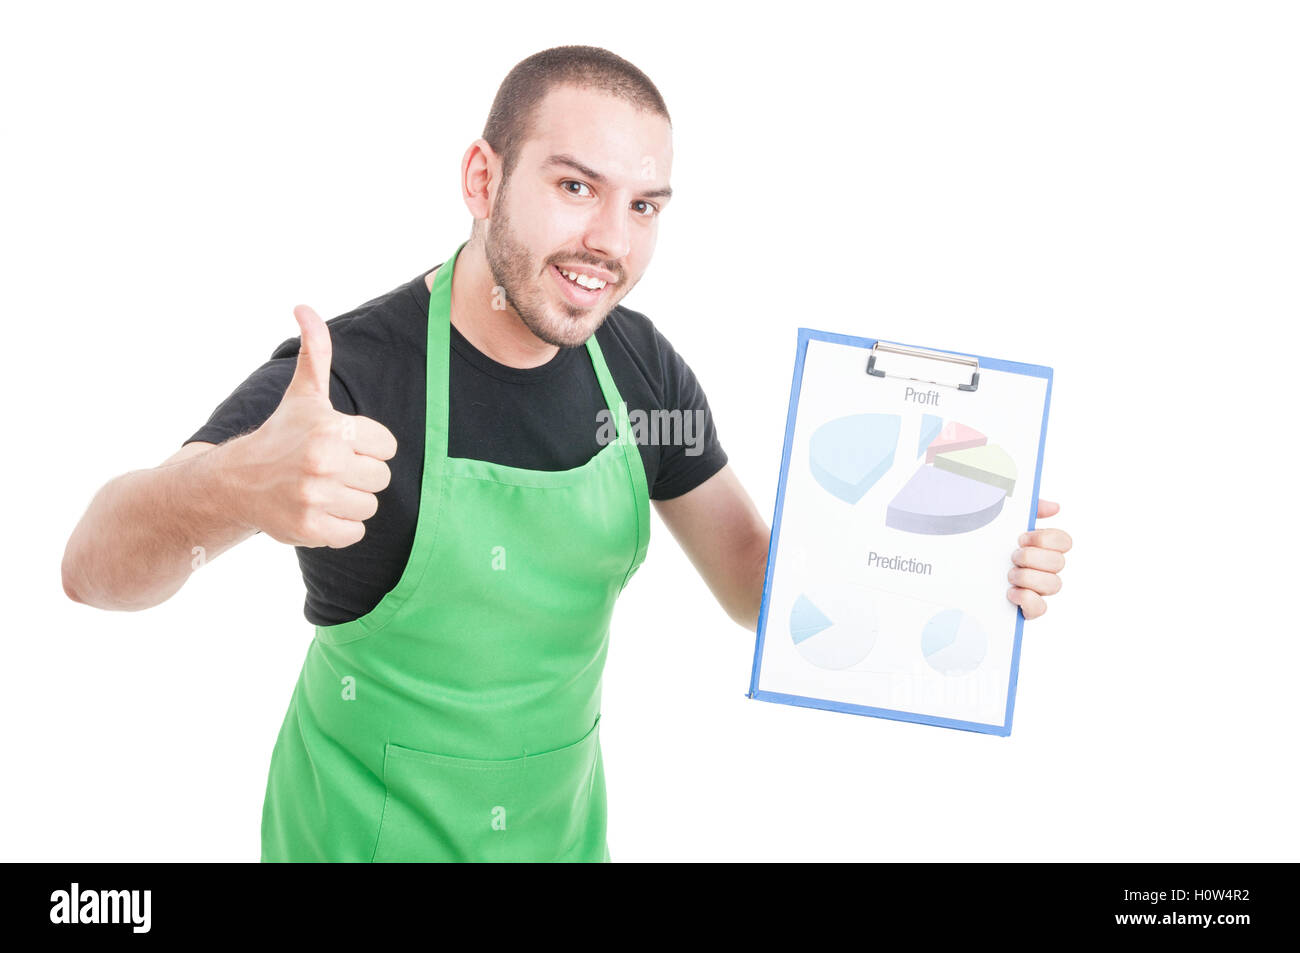 Young employee showing like holding profit and predictions clipboard isolated on white background with advertising area Stock Photo